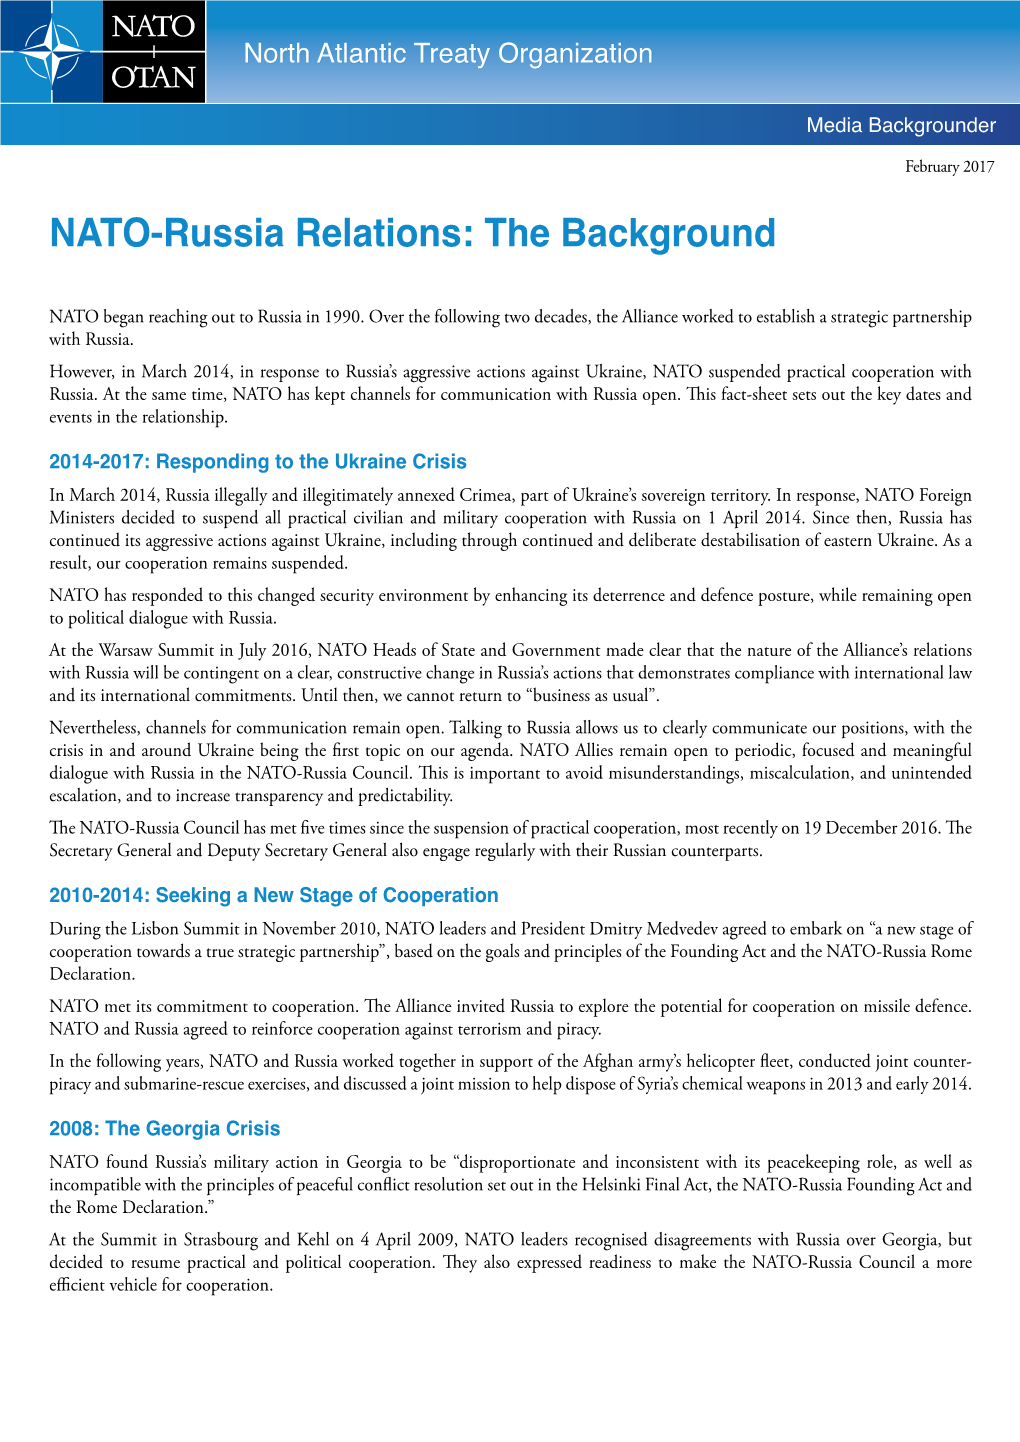 NATO-Russia Relations: the Background